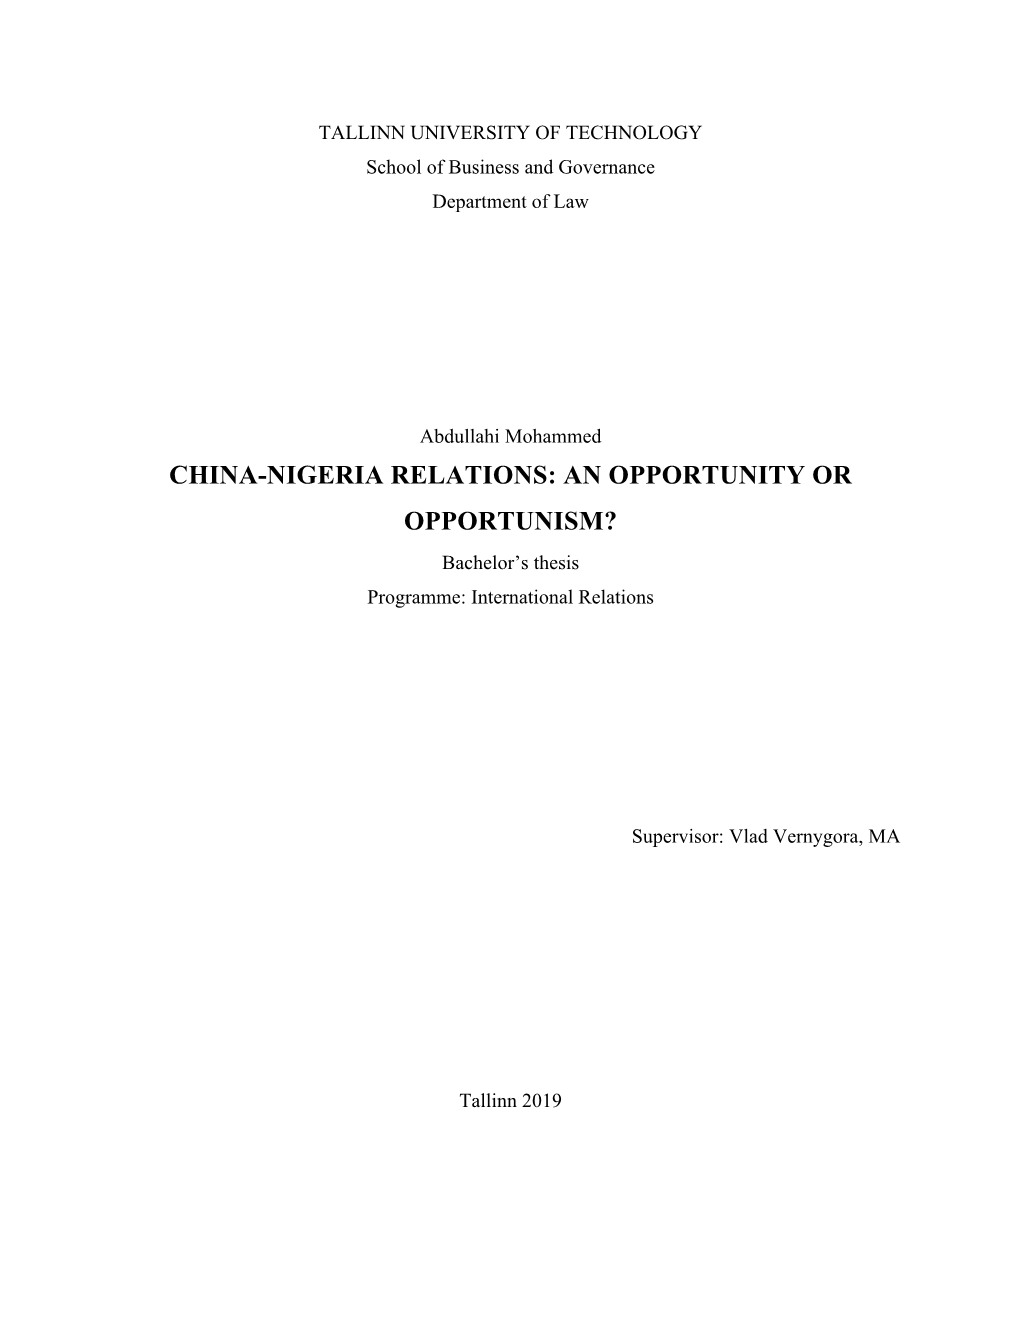 CHINA-NIGERIA RELATIONS: an OPPORTUNITY OR OPPORTUNISM? Bachelor’S Thesis Programme: International Relations